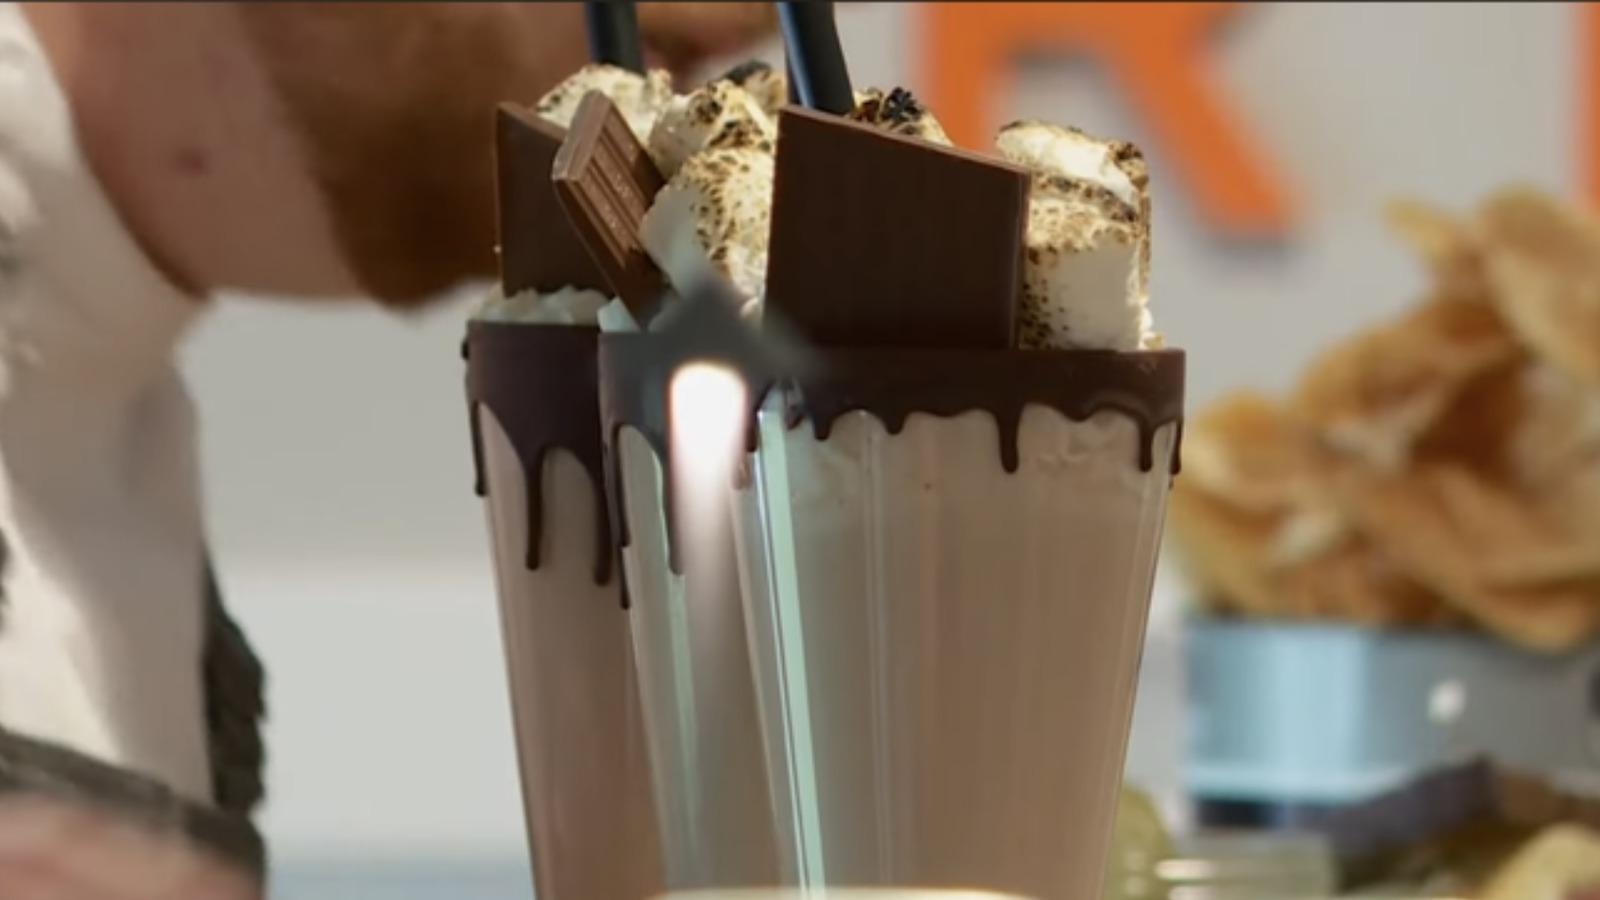 MLB fans are divided after the Chicago White Sox introduced a wild milkshake as its latest ballpark food invention.